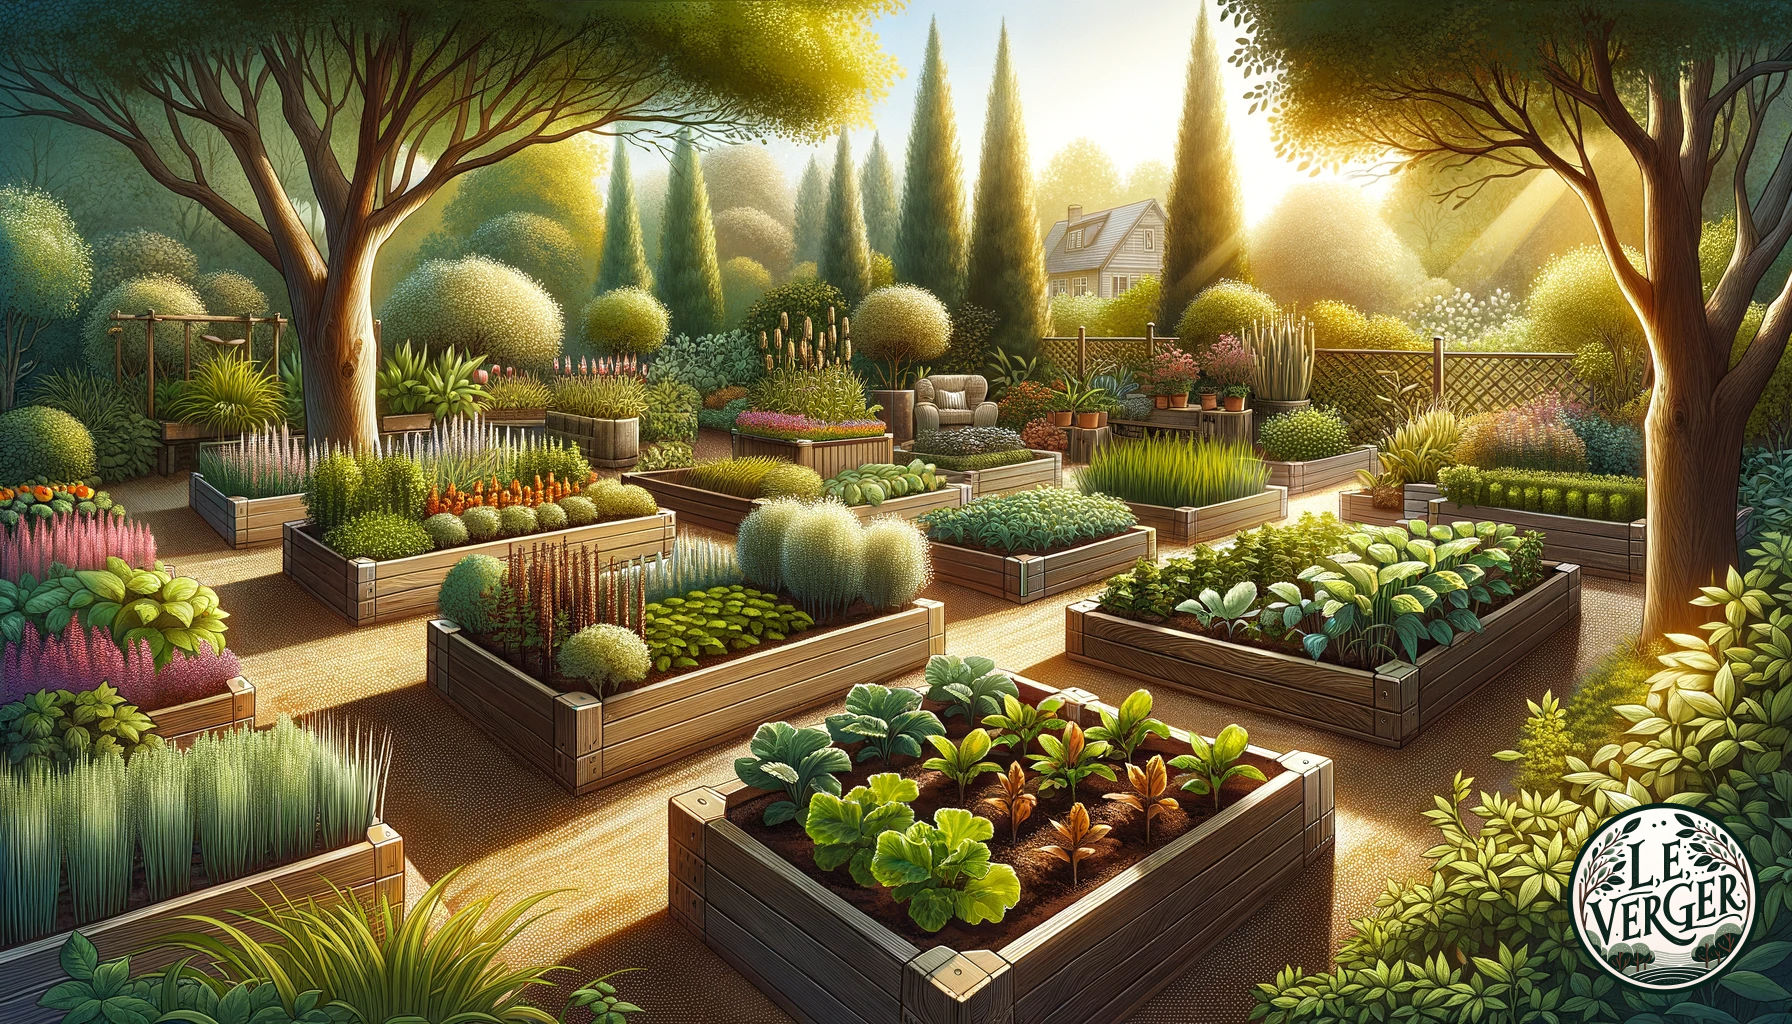 Illustration in wide aspect showing a beautiful garden scene with a group of raised beds. The raised beds are made from different materials including oak wood, metal, stone, and plastic. Each bed is filled with rich soil and has a mix of plants, shrubs, and vegetables growing. The sun casts a warm glow over the garden, and there's a feeling of abundance and growth.